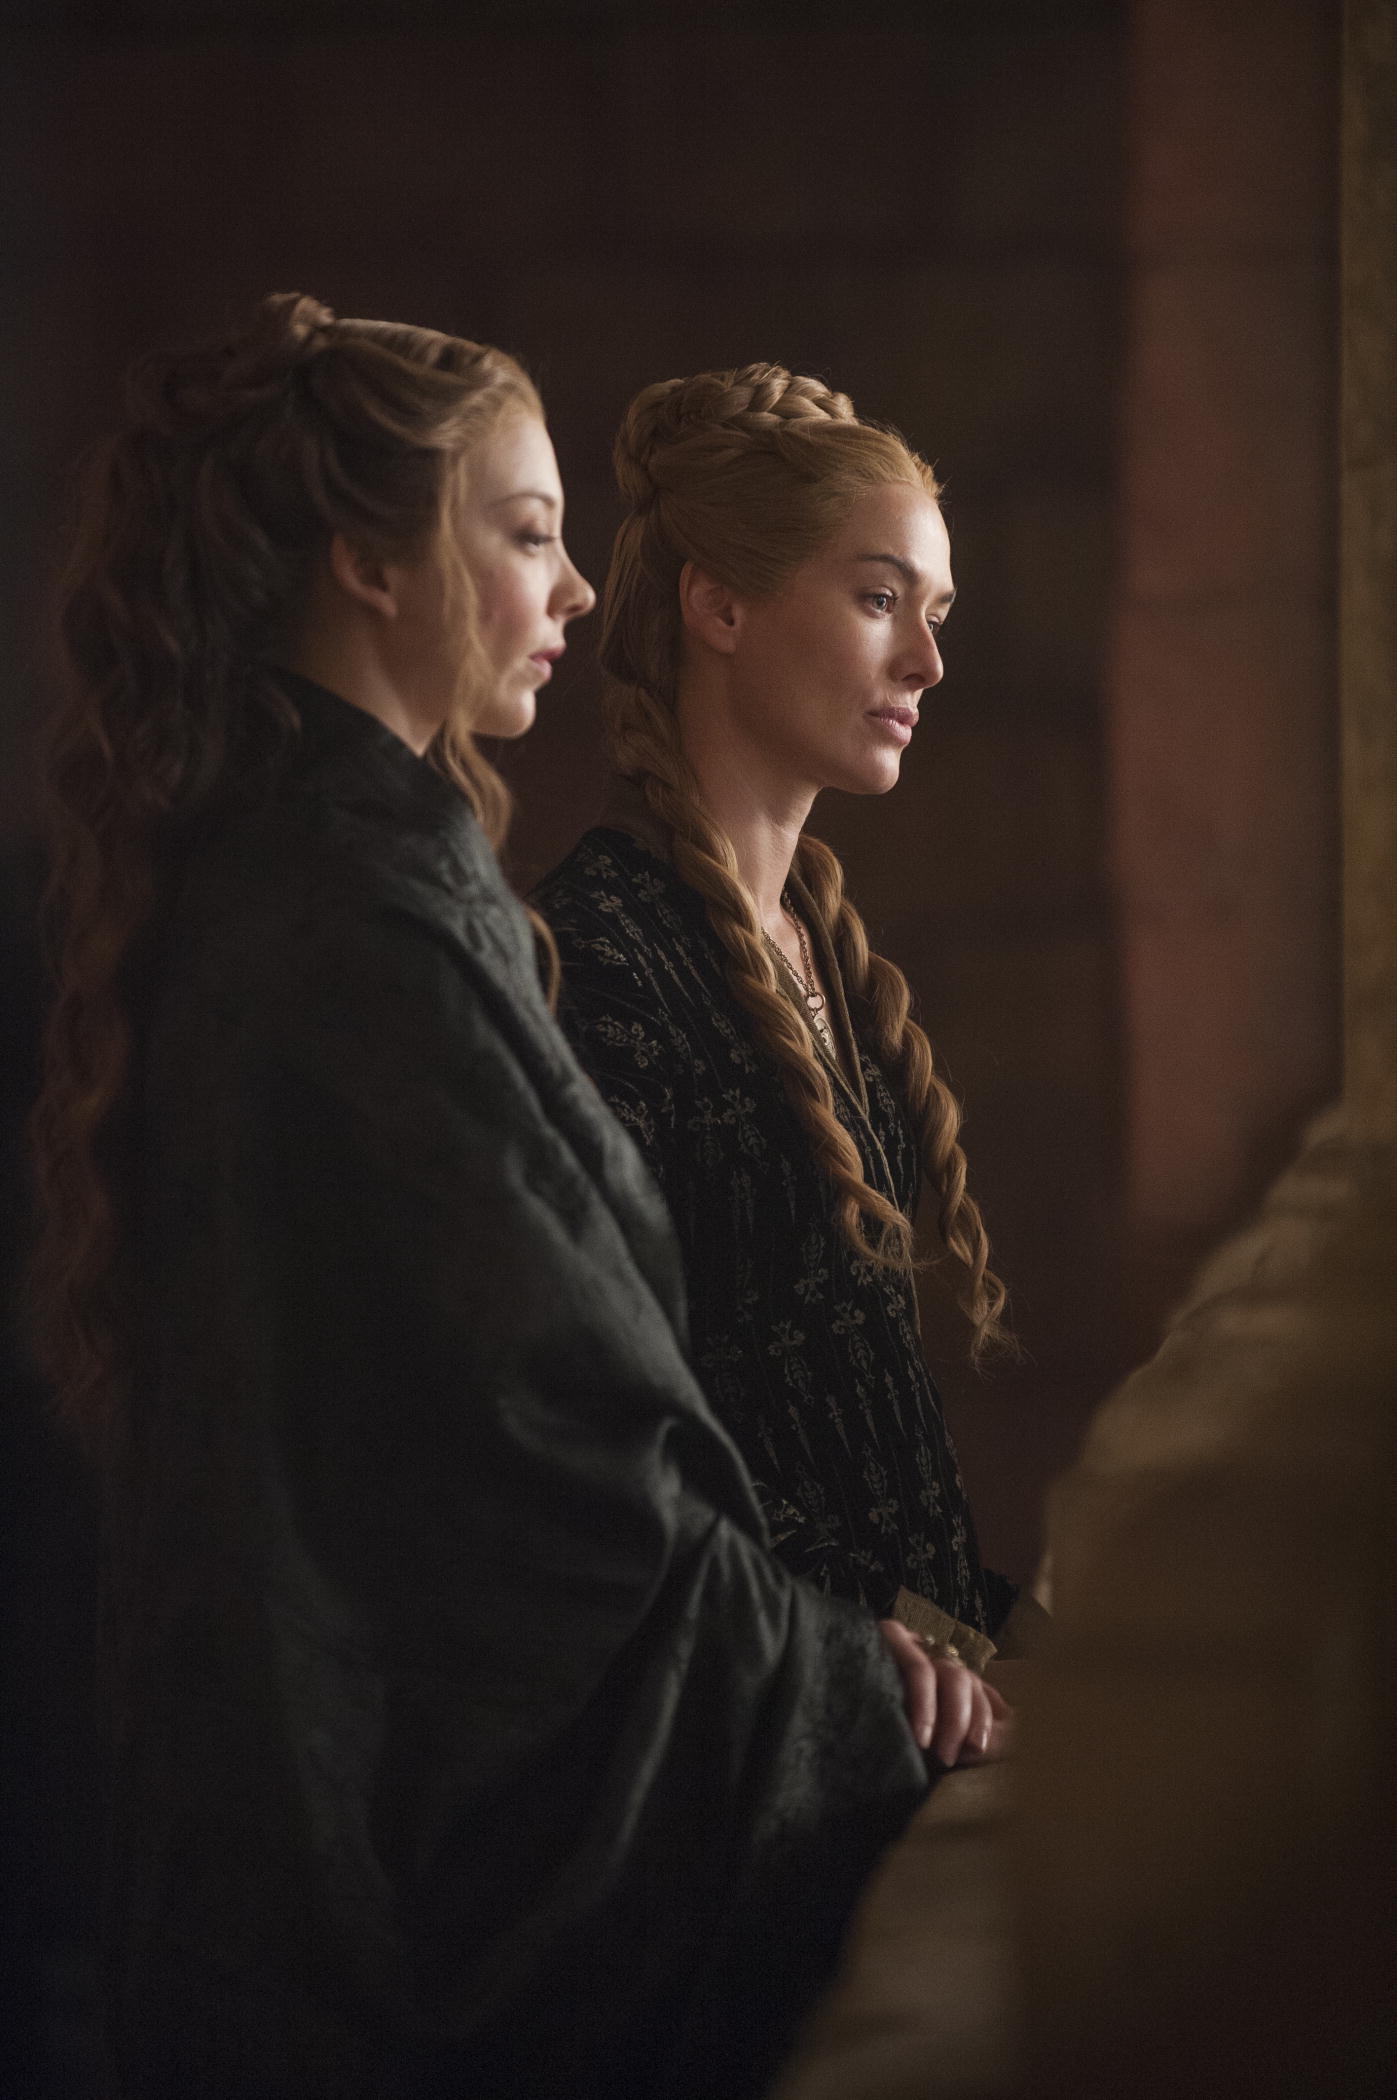 Margaery Tyrell and Cersei Lannister Season 4